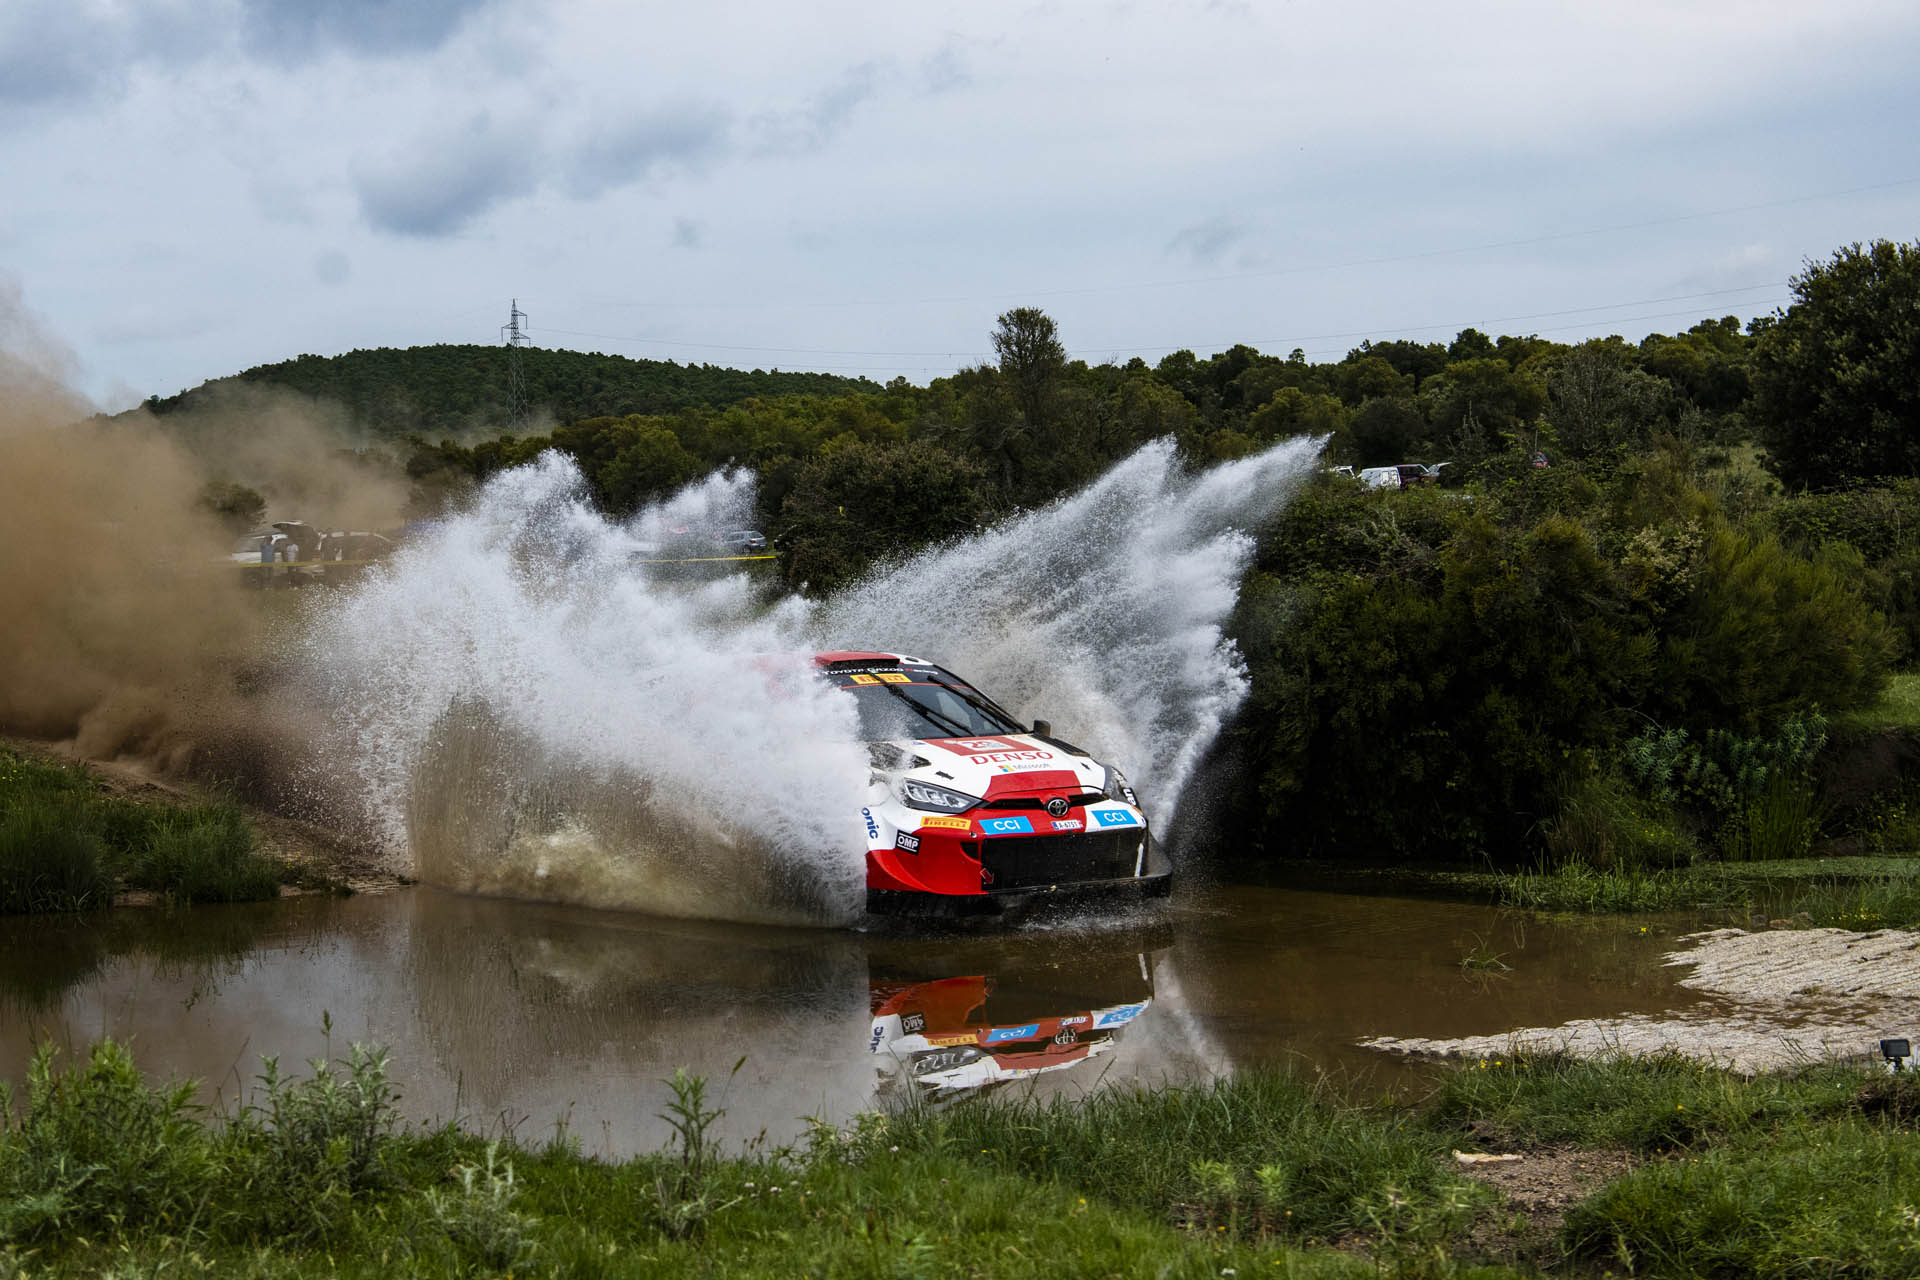 Elfyn Evans (GB) Scott Martin (GB) Of team TOYOTA GAZOO RACING WRT are seen performing during the World Rally Championship Italy in Olbia, Italy on June 3, 2023. // Jaanus Ree / Red Bull Content Pool // SI202306030581 // Usage for editorial use only //